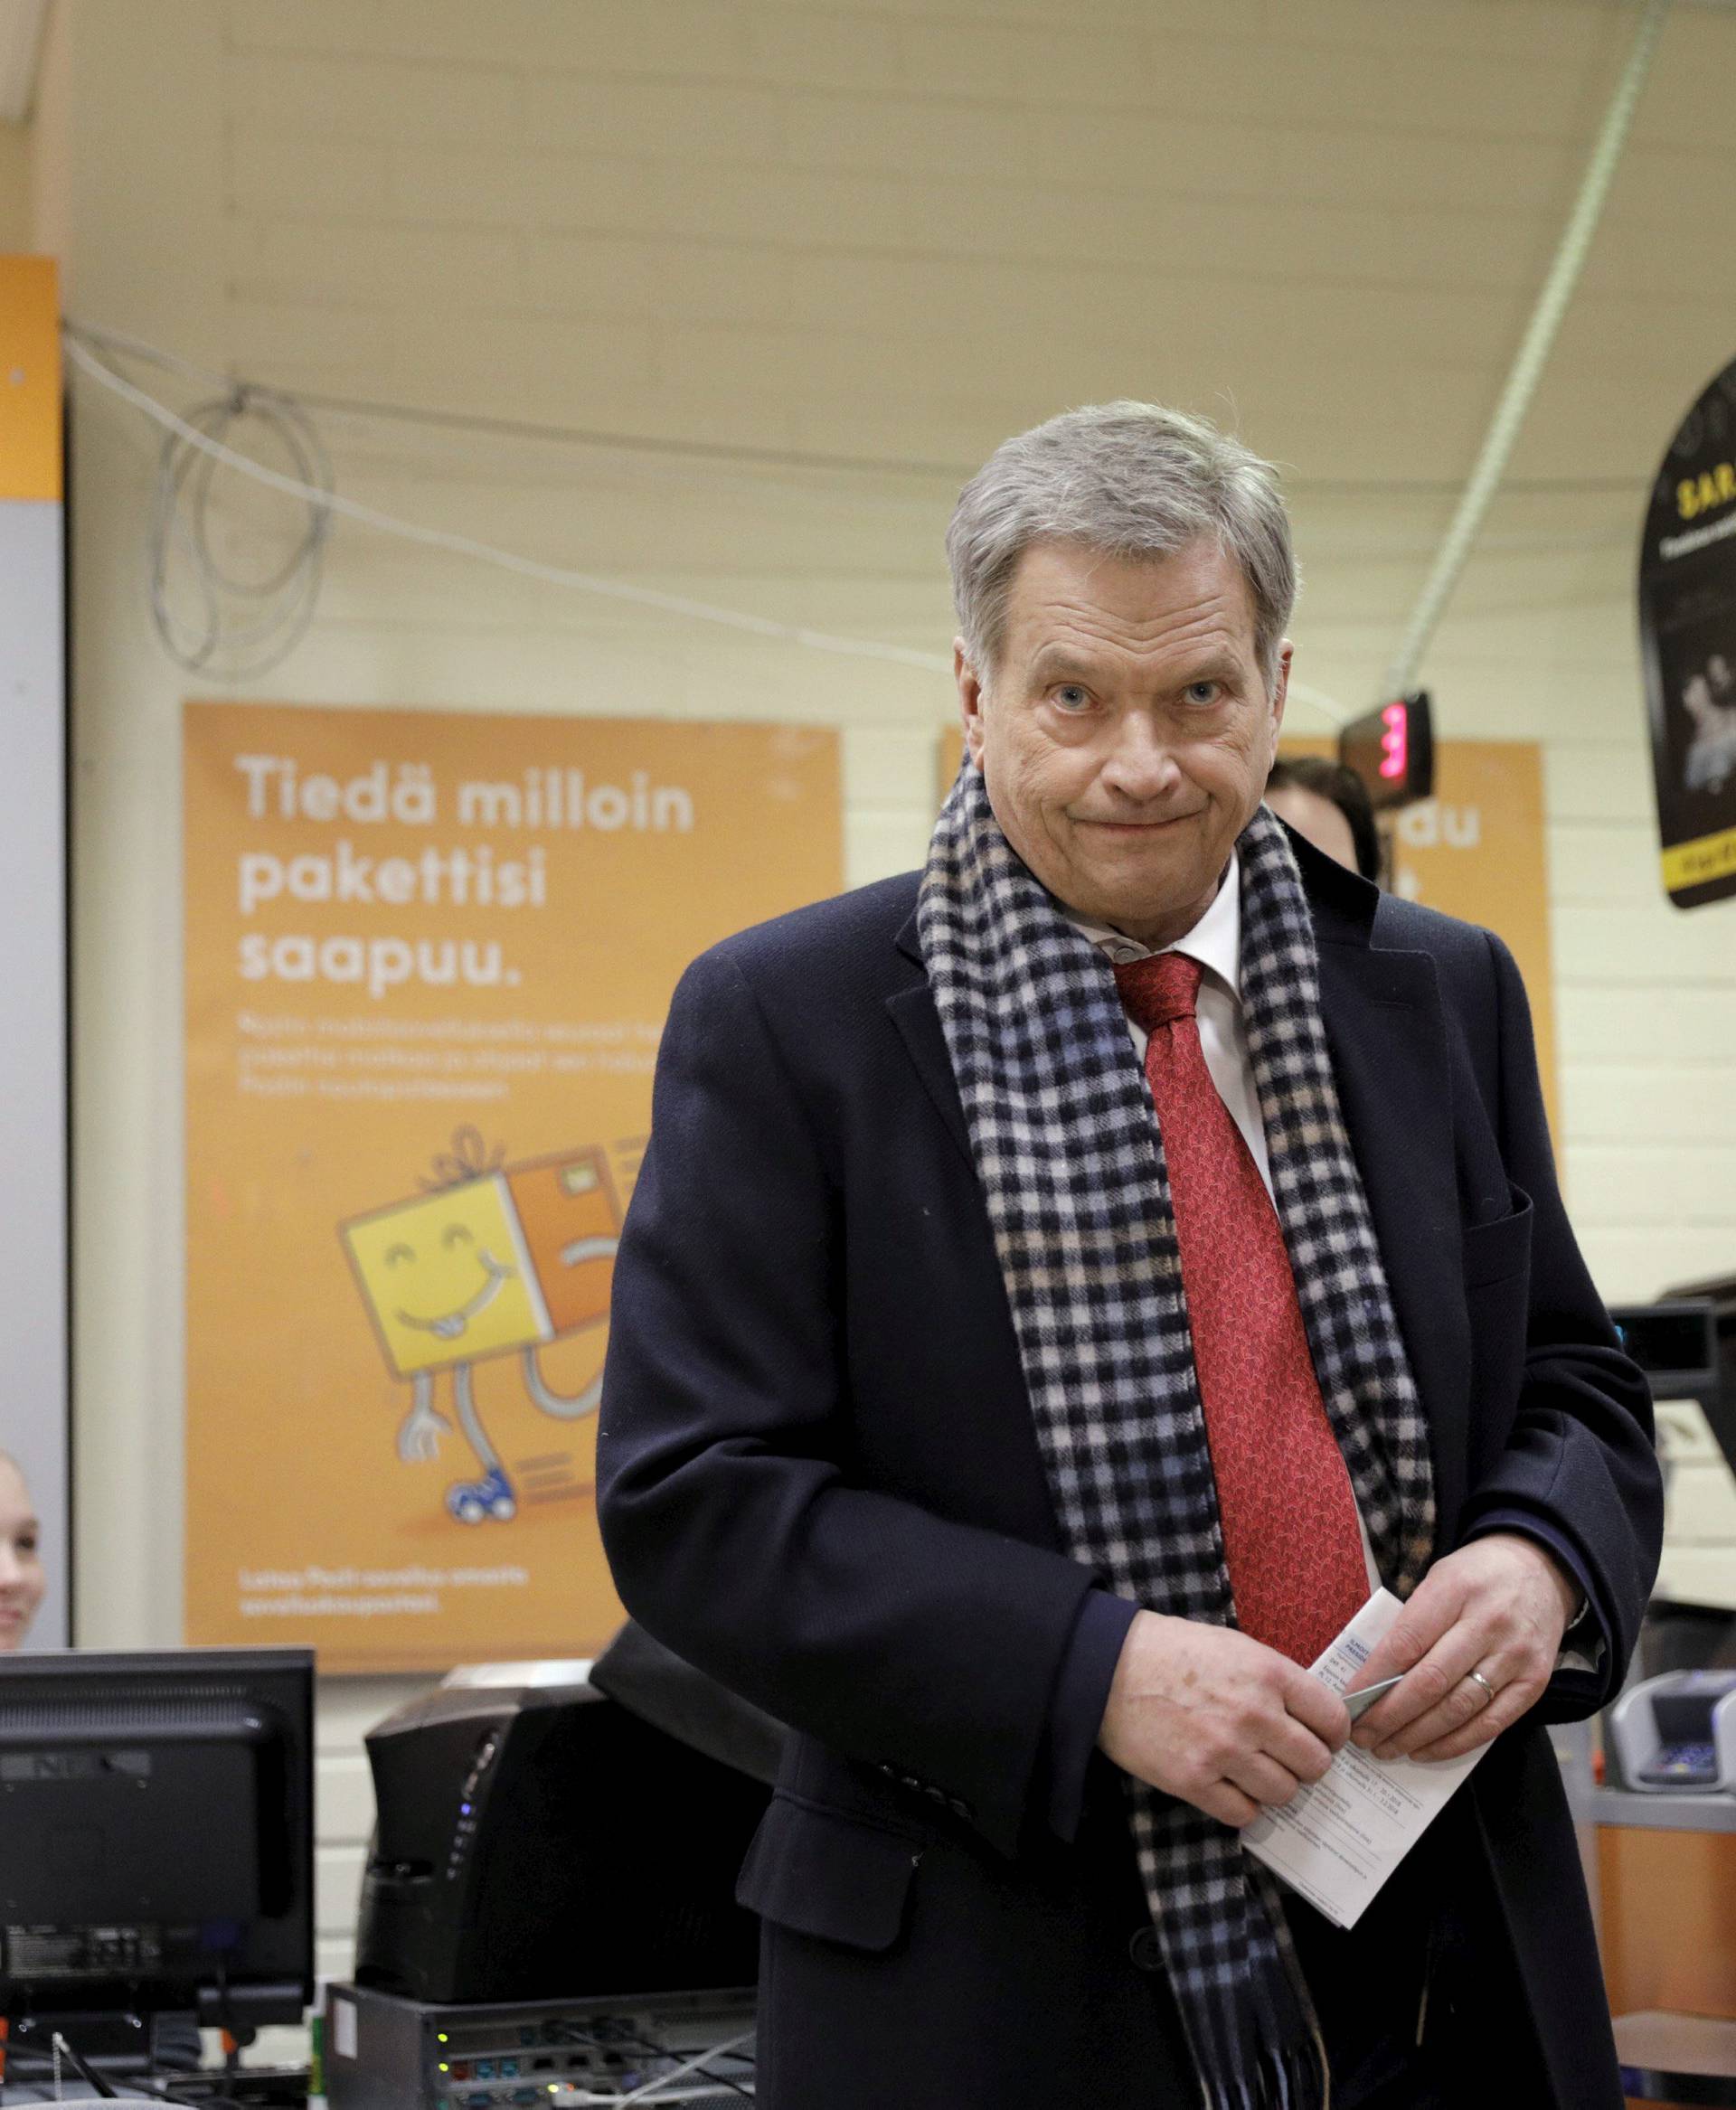 Acting President of Finland and candidate for presidential election, Sauli Niinisto casts his vote in advance voting in Helsinki